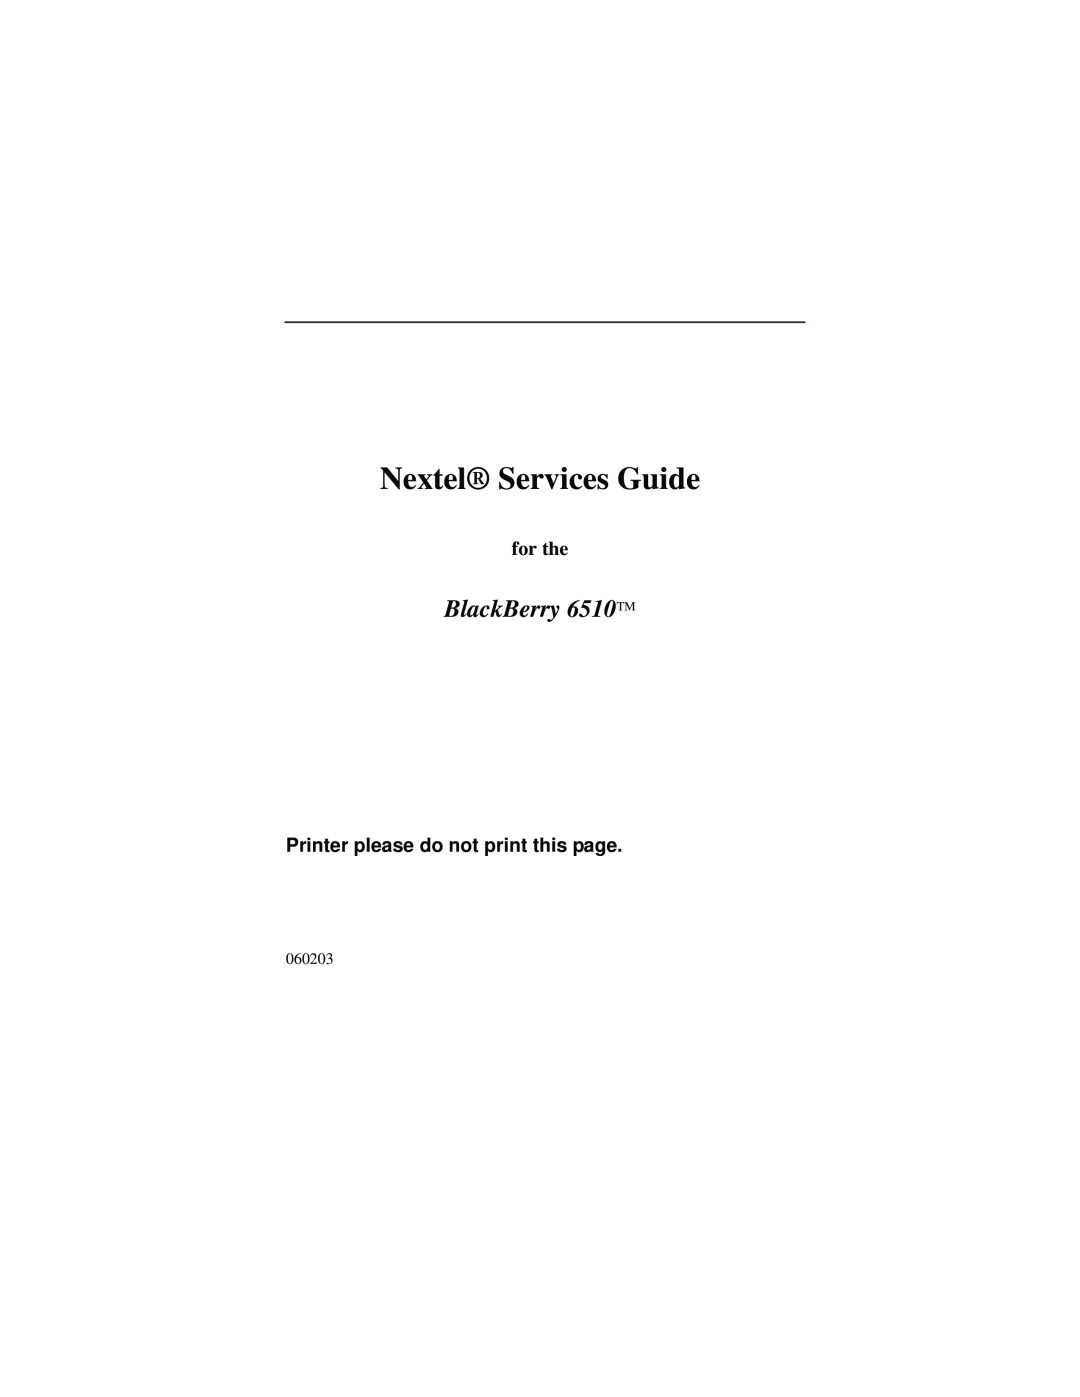 Nextel comm manual Nextel Services Guide, BlackBerry 6510TM, for the, Printer please do not print this page 